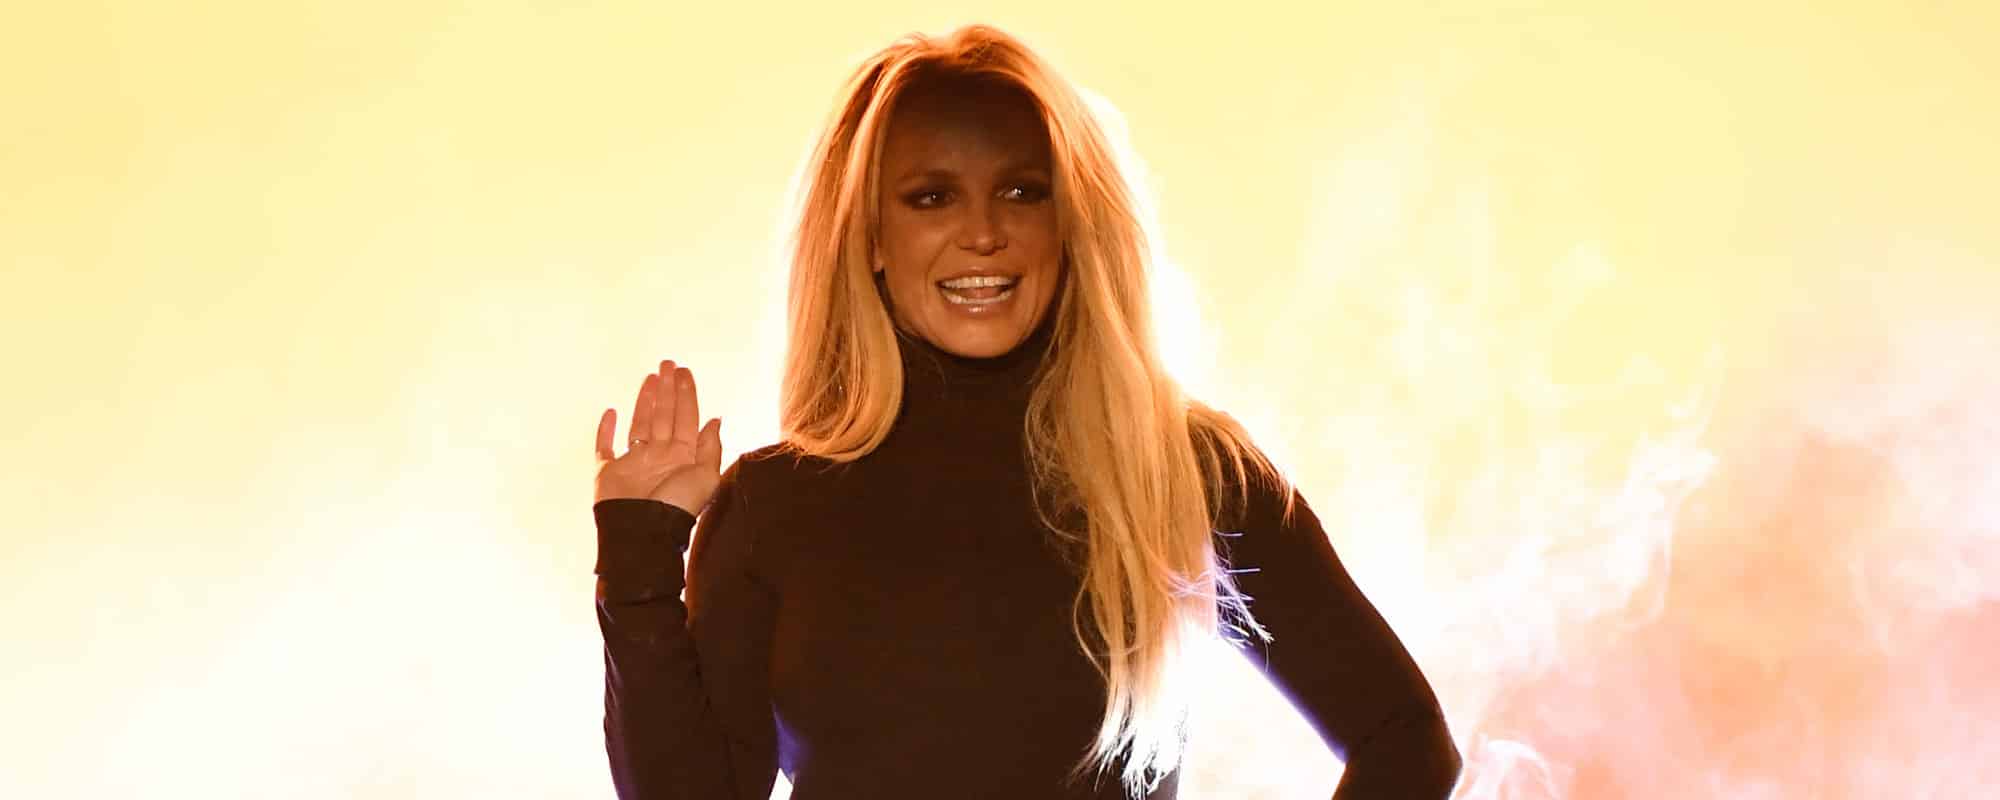 Justin Timberlake, Mia Farrow, Mariah Carey and More Show Support for Britney Spears